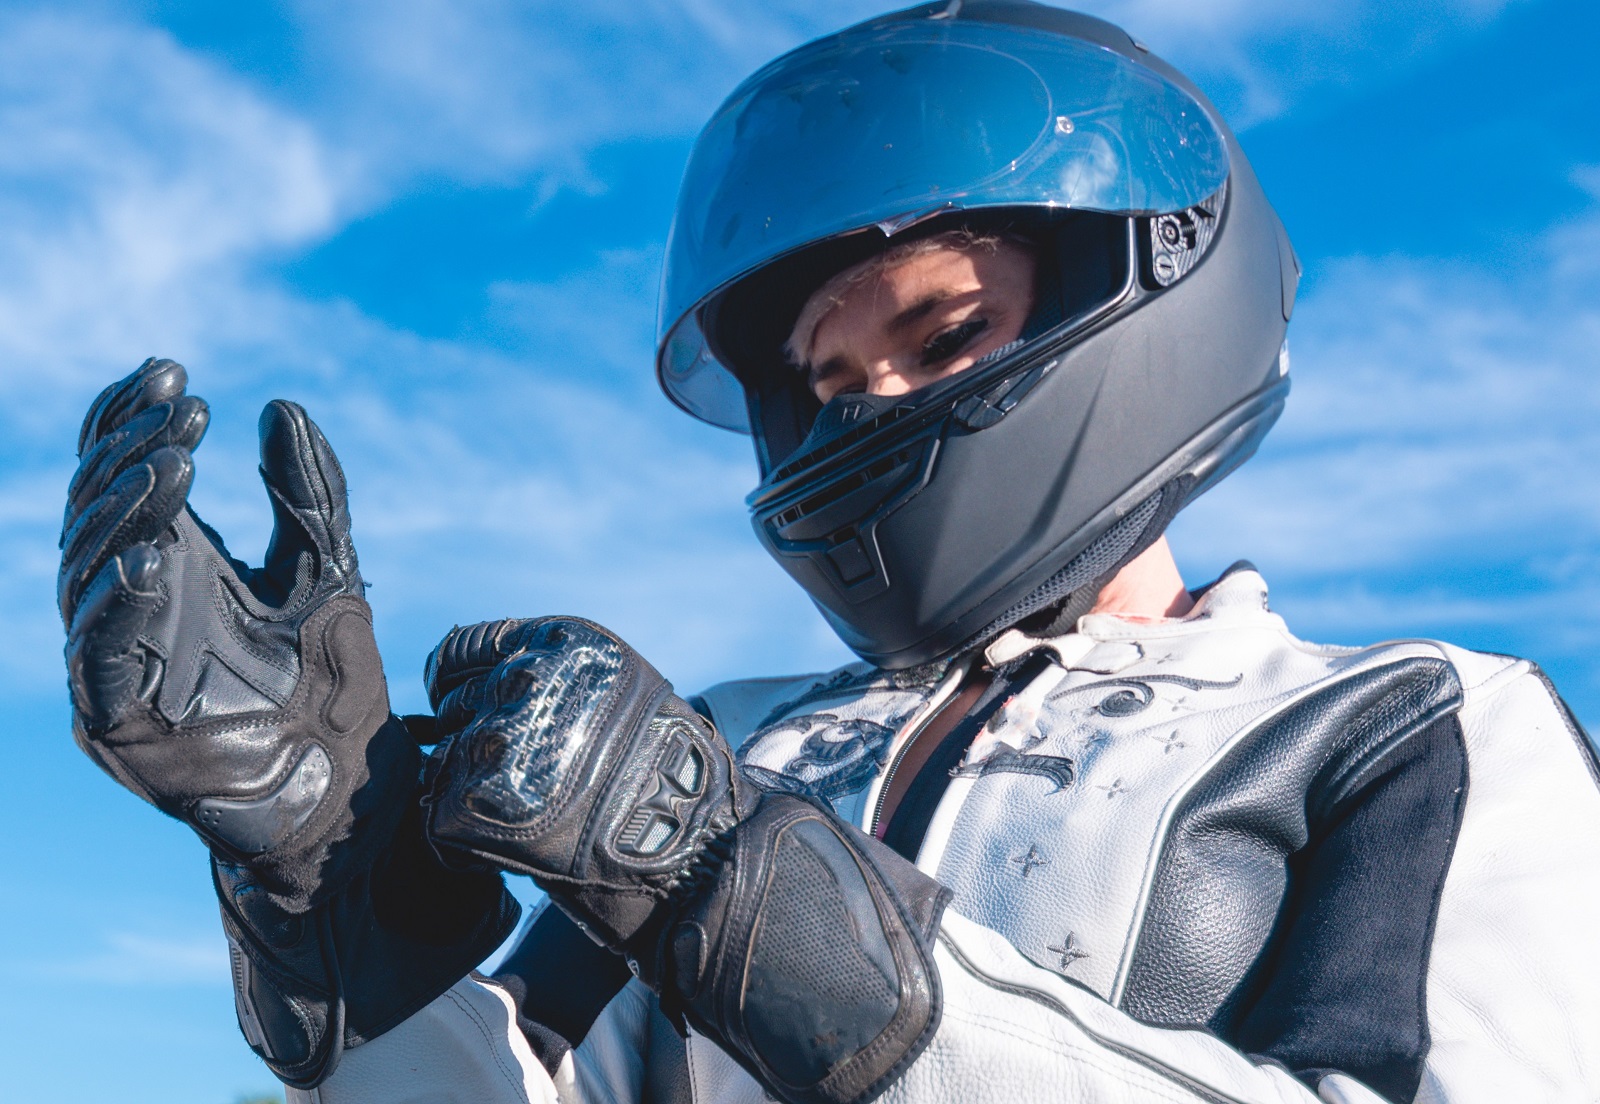 <p class="wp-caption-text">Image Credit: Shutterstock / Cerrotalavan</p>  <p><span>Gloves protect your hands from the elements and in case of a fall. They should have reinforced knuckles and palm areas and be made from abrasion-resistant materials.</span></p>